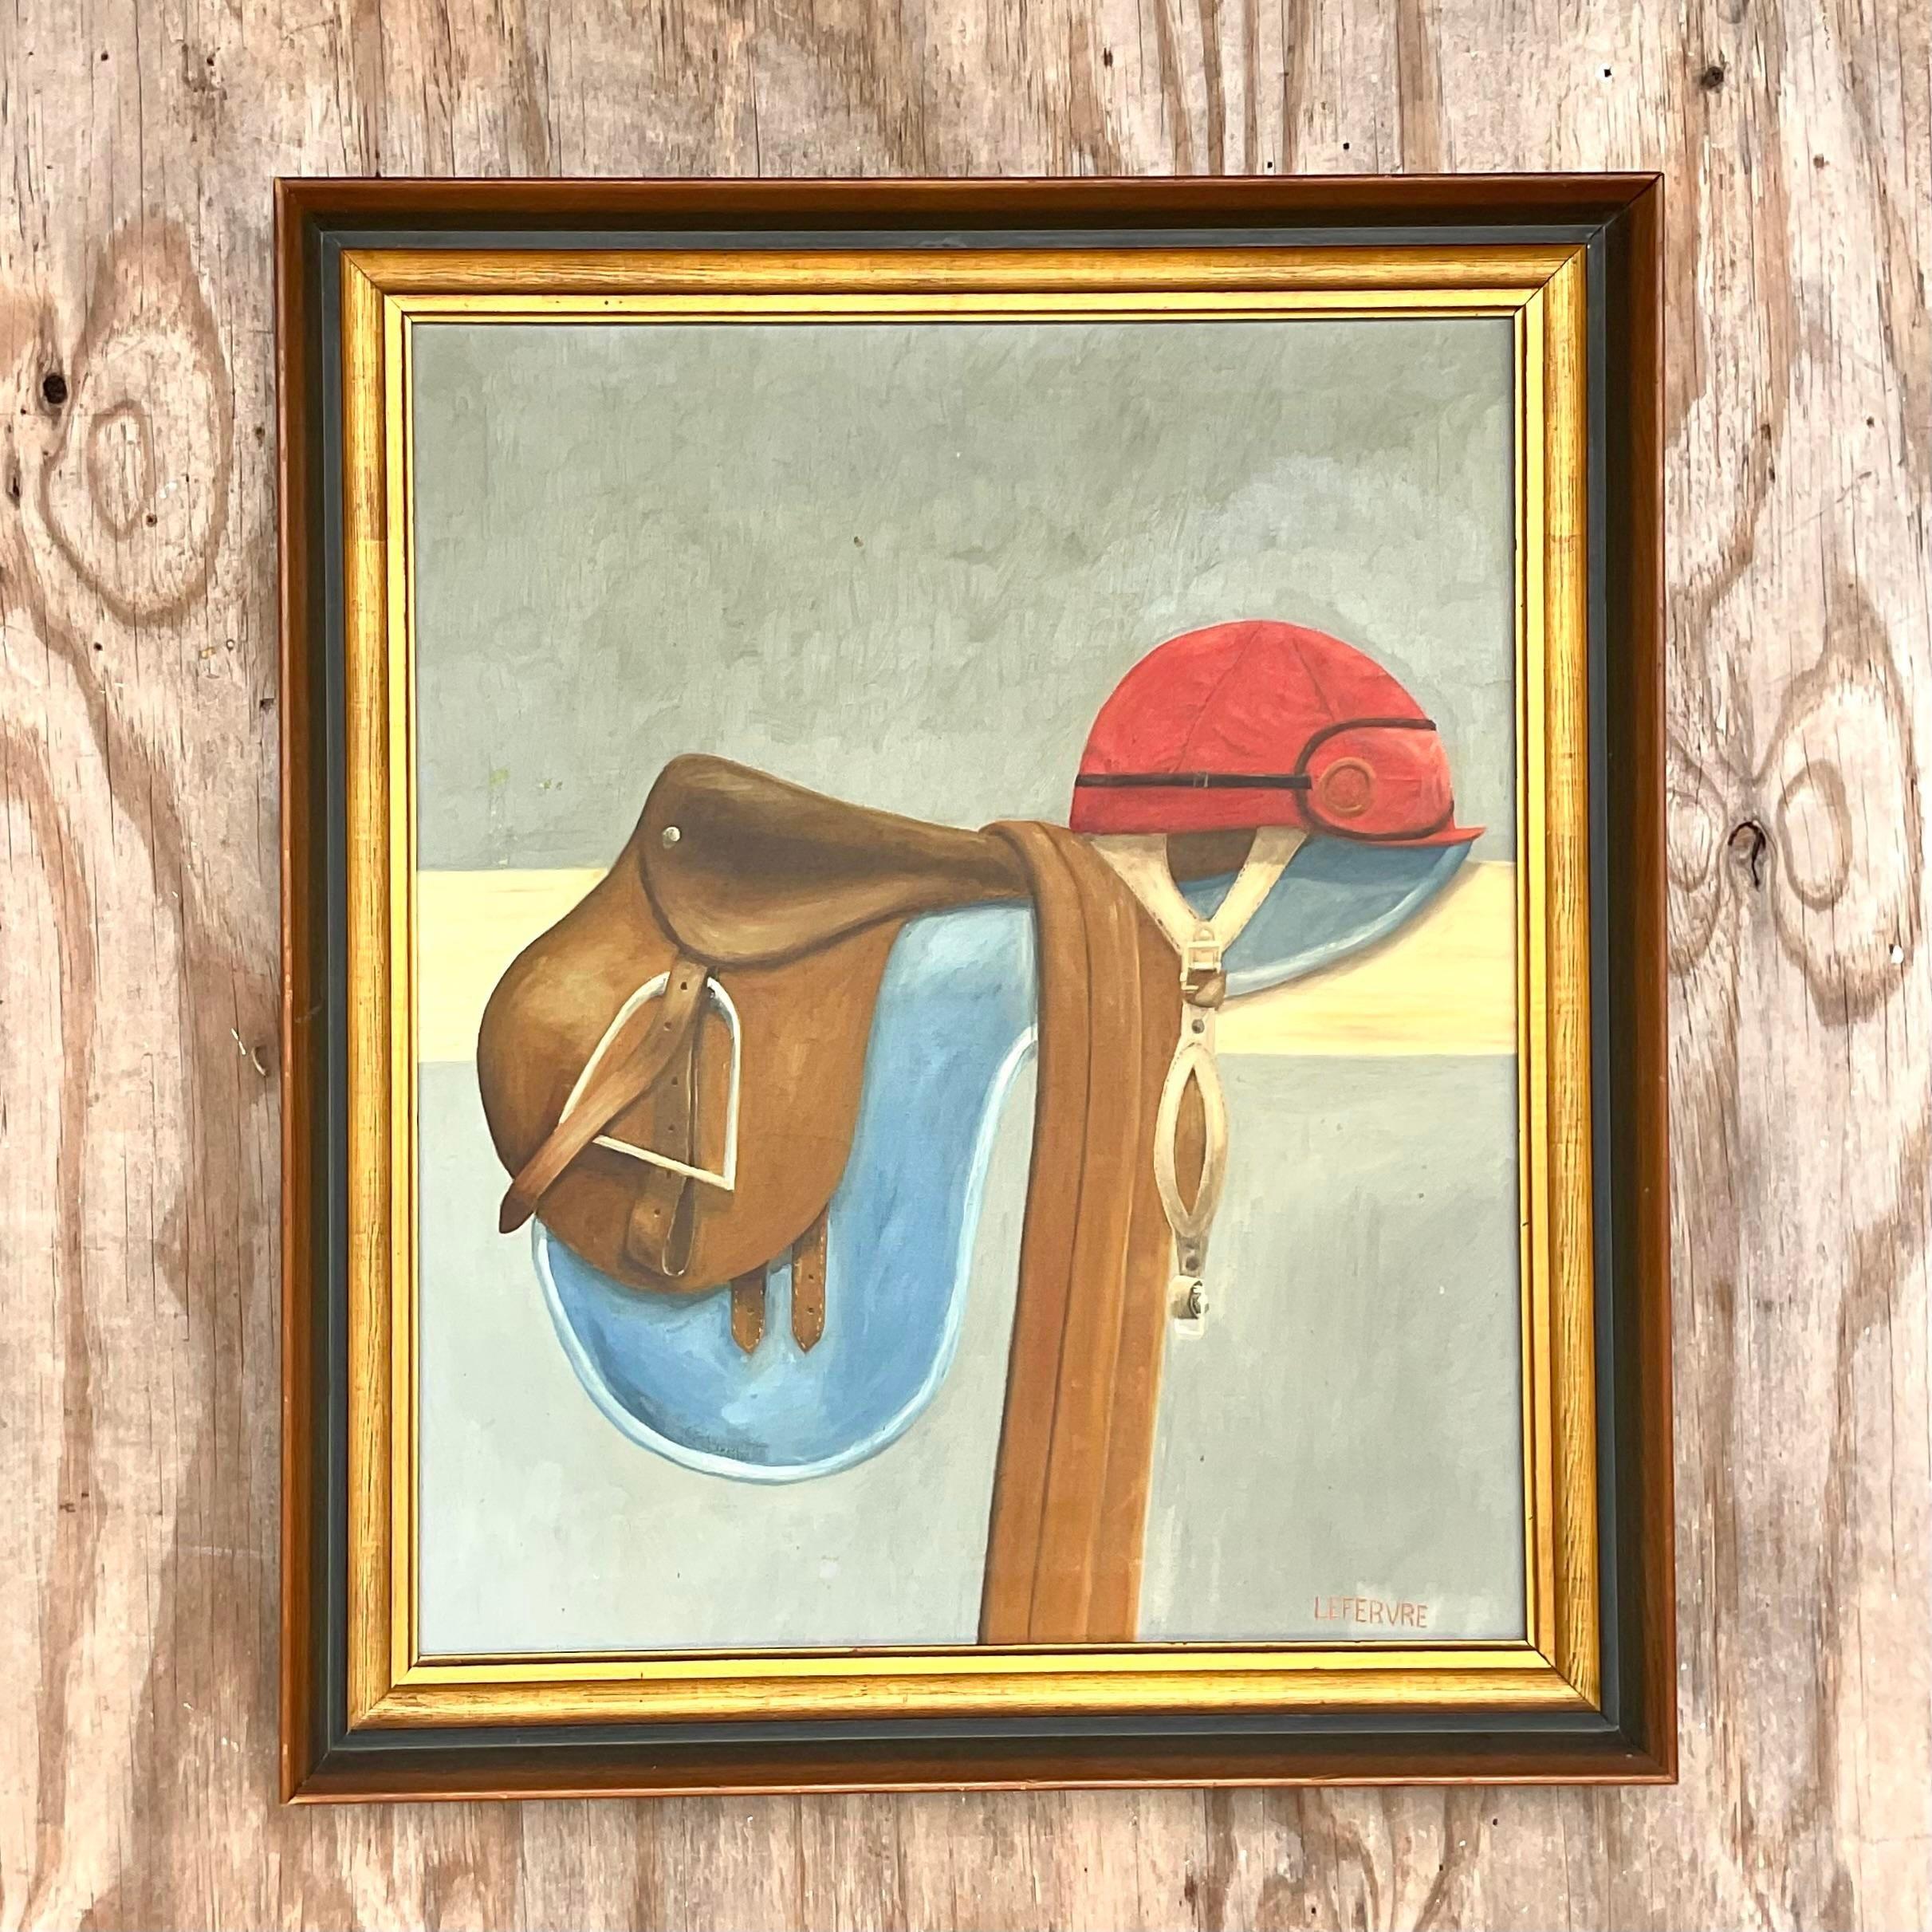 Vintage Boho Riding Gear Signed Original Oil Painting on Canvas 2